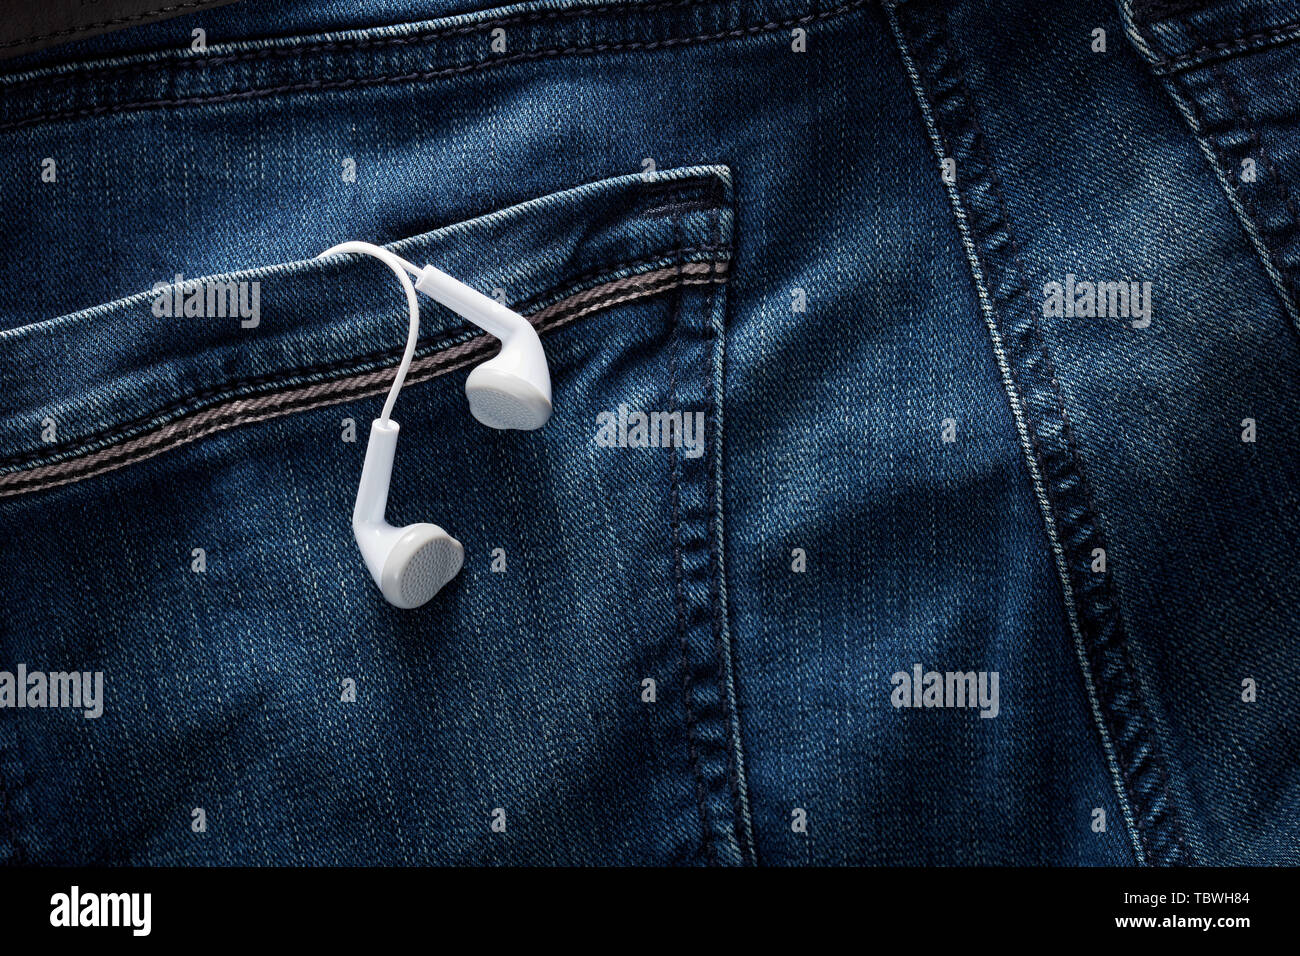 White earphones in the back pocket of a blue jean under dark dramatic moody lighting. Close up view. Stock Photo